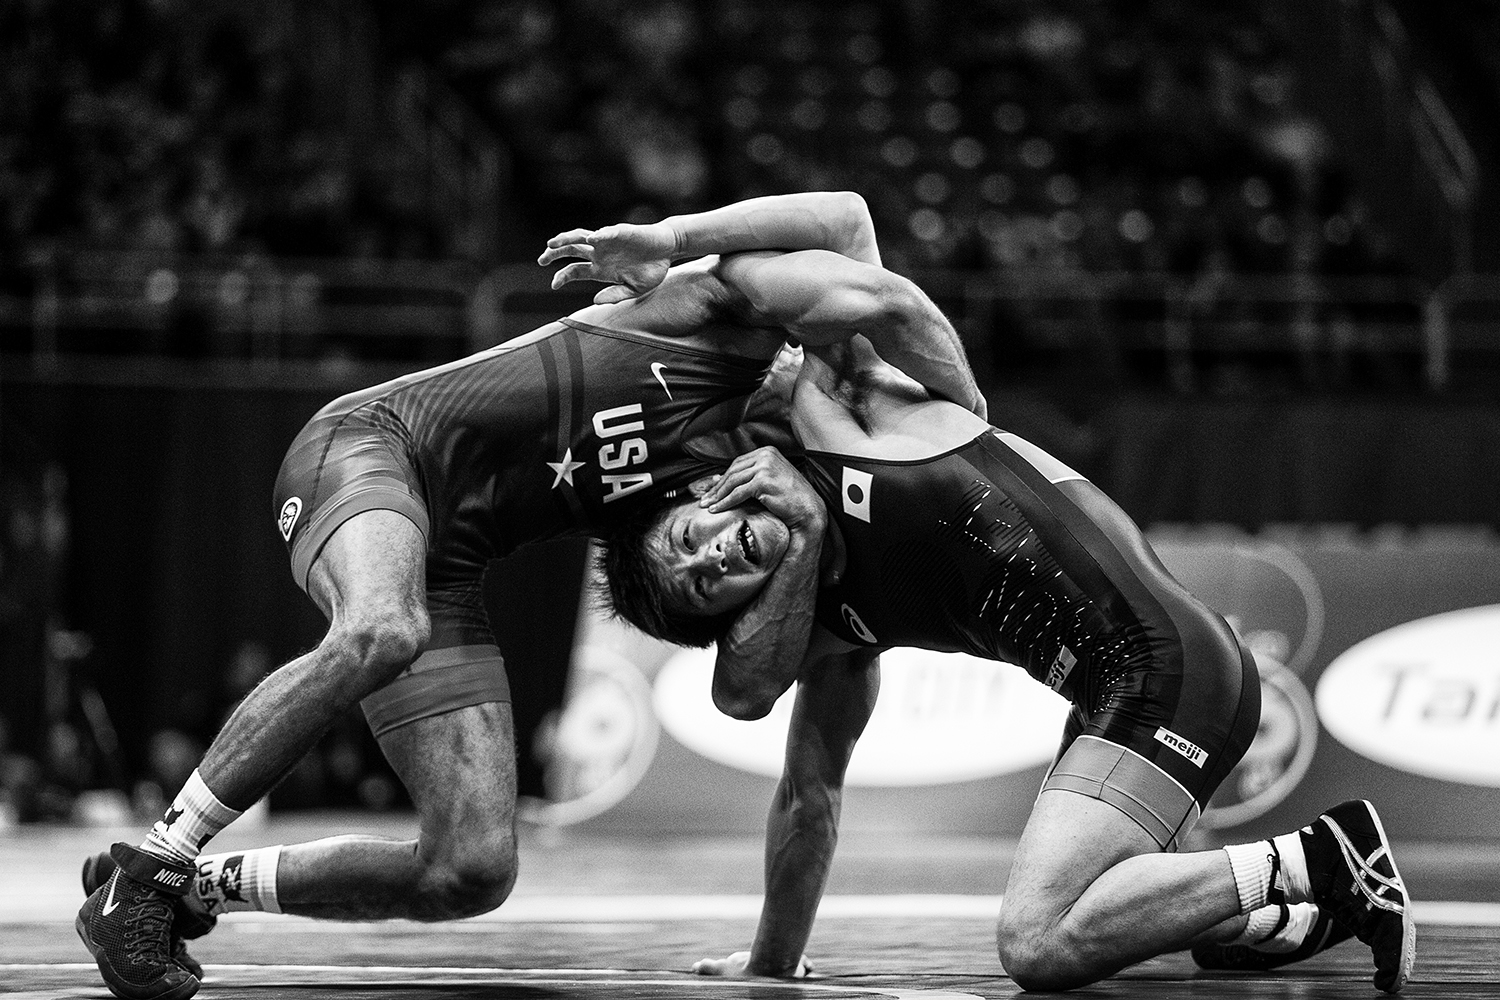  Japan's Kazuya Koyanagi, right, grapples with America's Kendric Maple at 61 kg during the 2018 Men's Freestyle World Cup at Carver-Hawkeye Arena in Iowa City on April 7, 2018. 